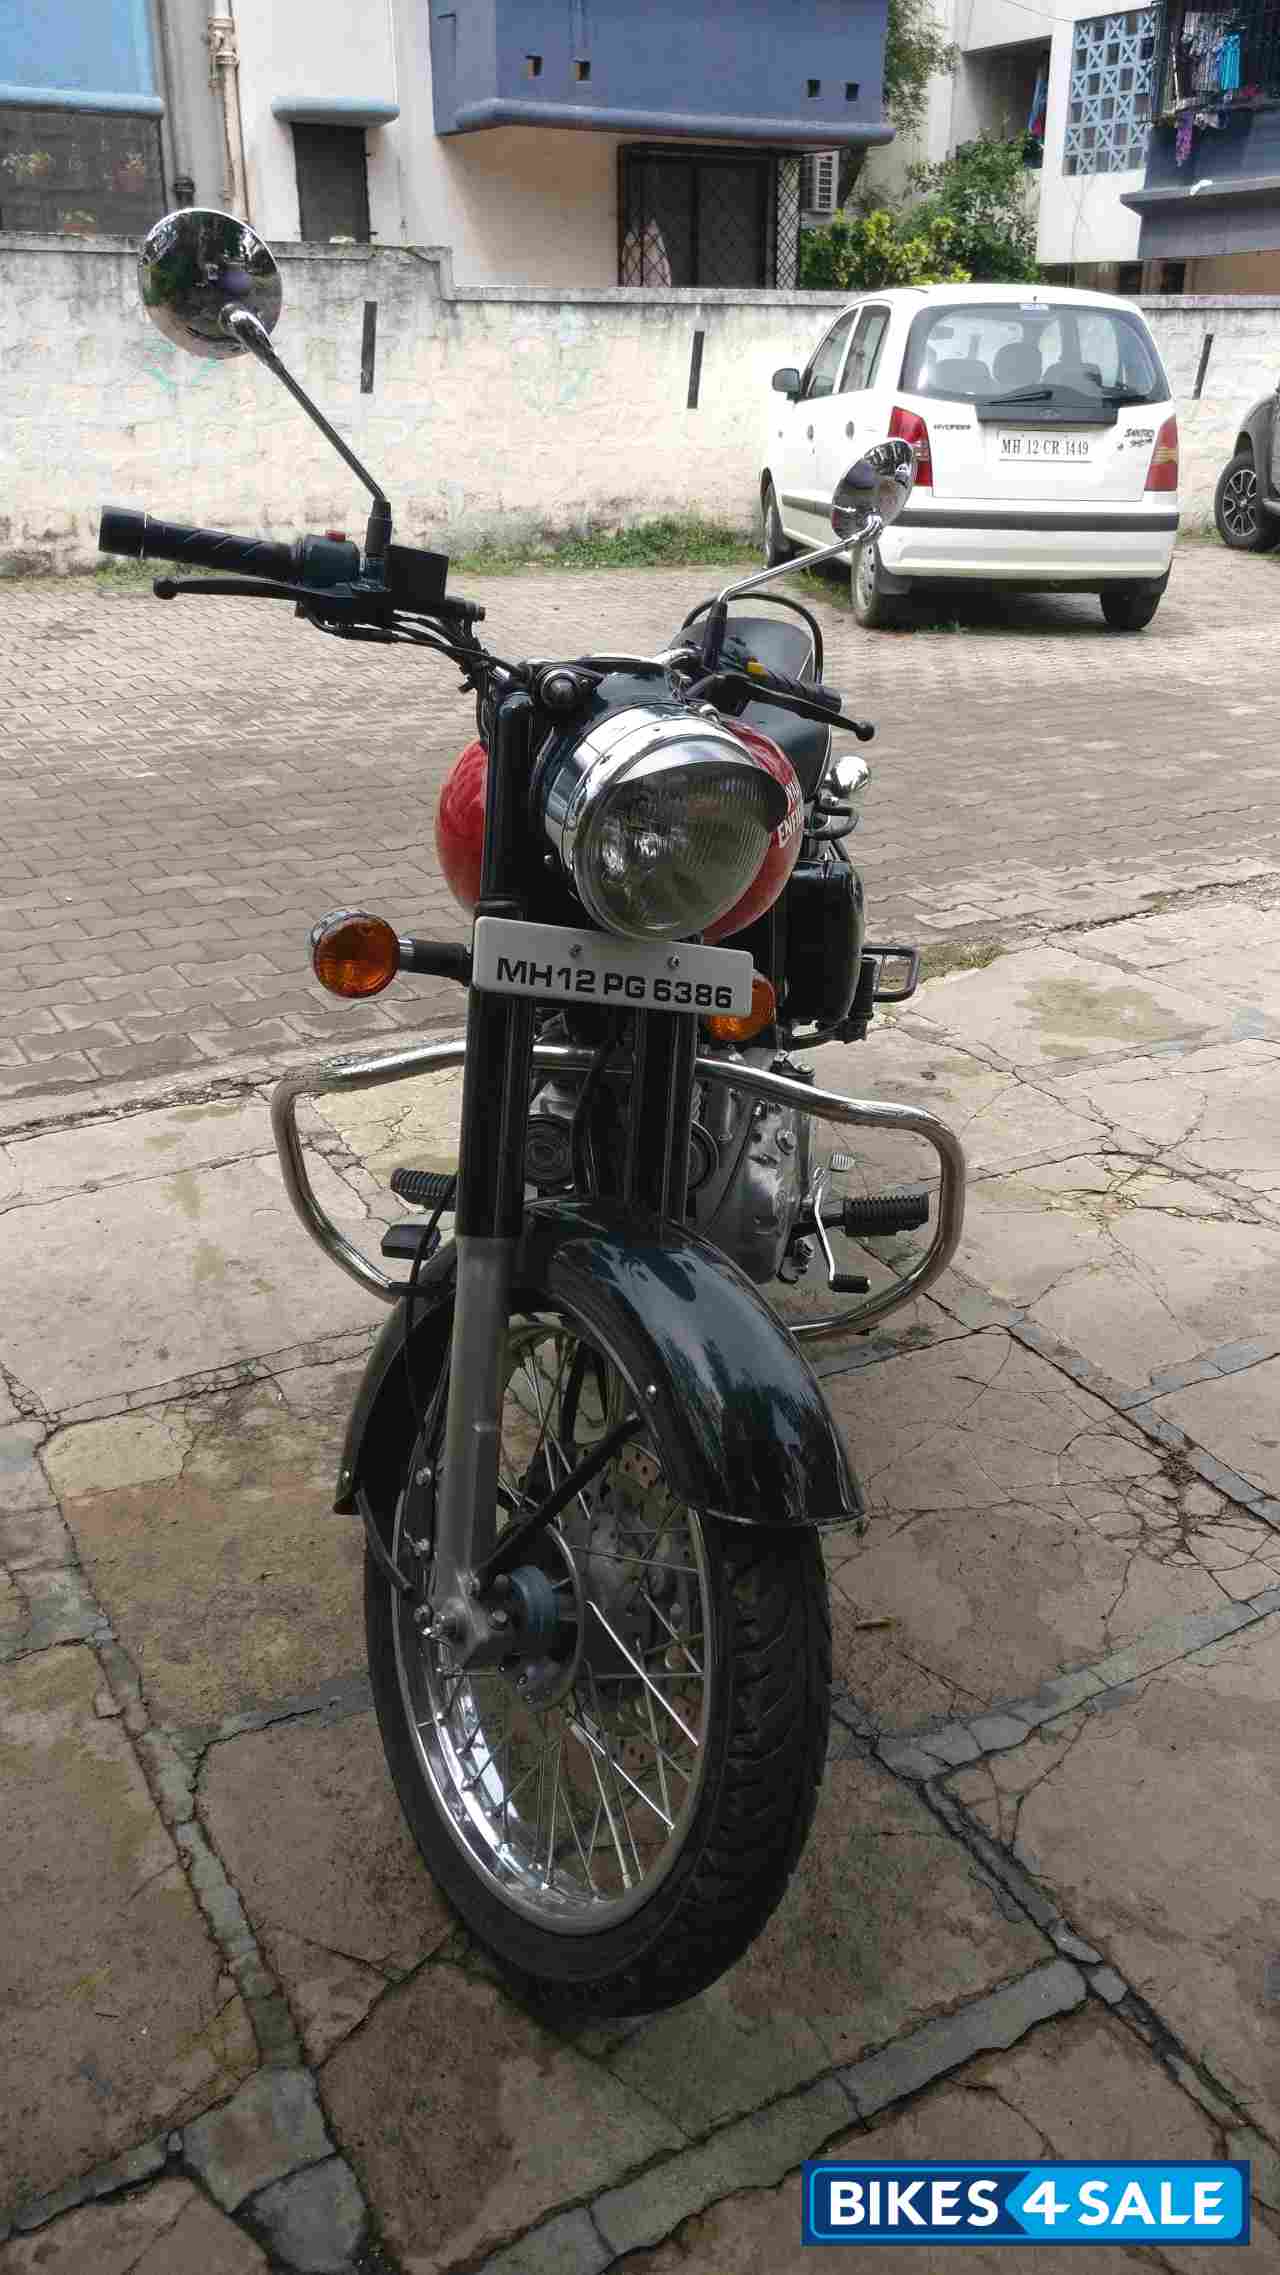 Redditch Red Royal Enfield Classic 350